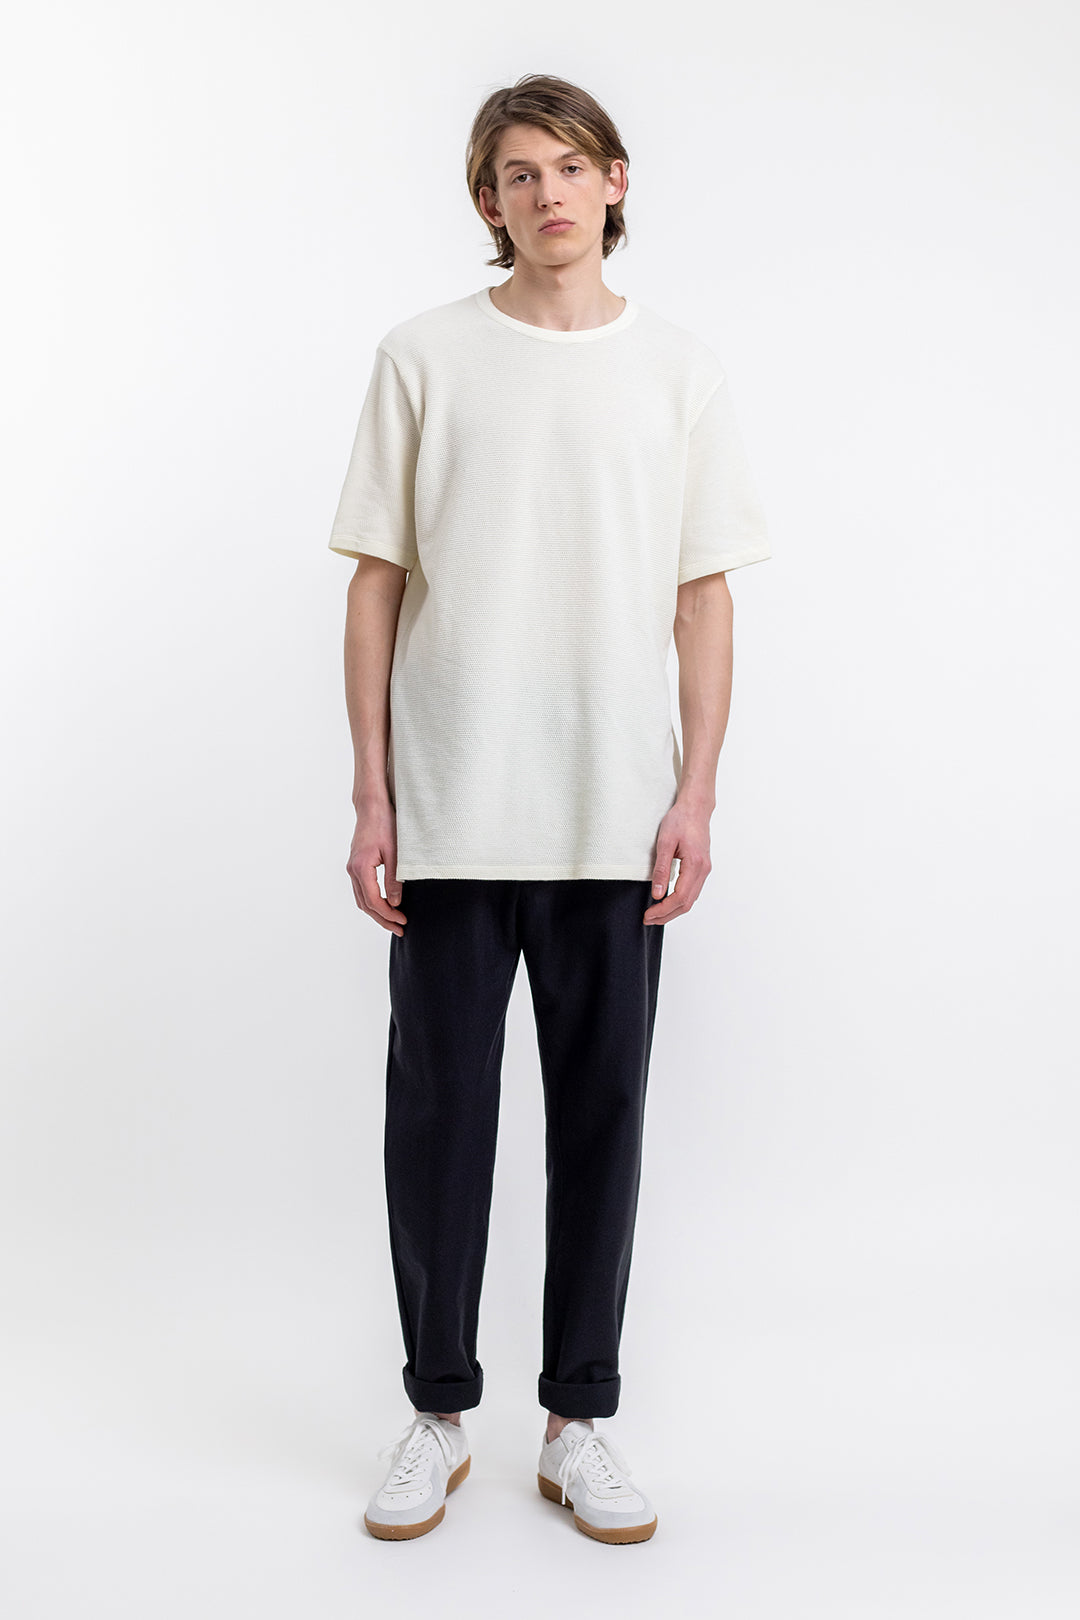 White T-shirt made from 100% organic cotton from Rotholz